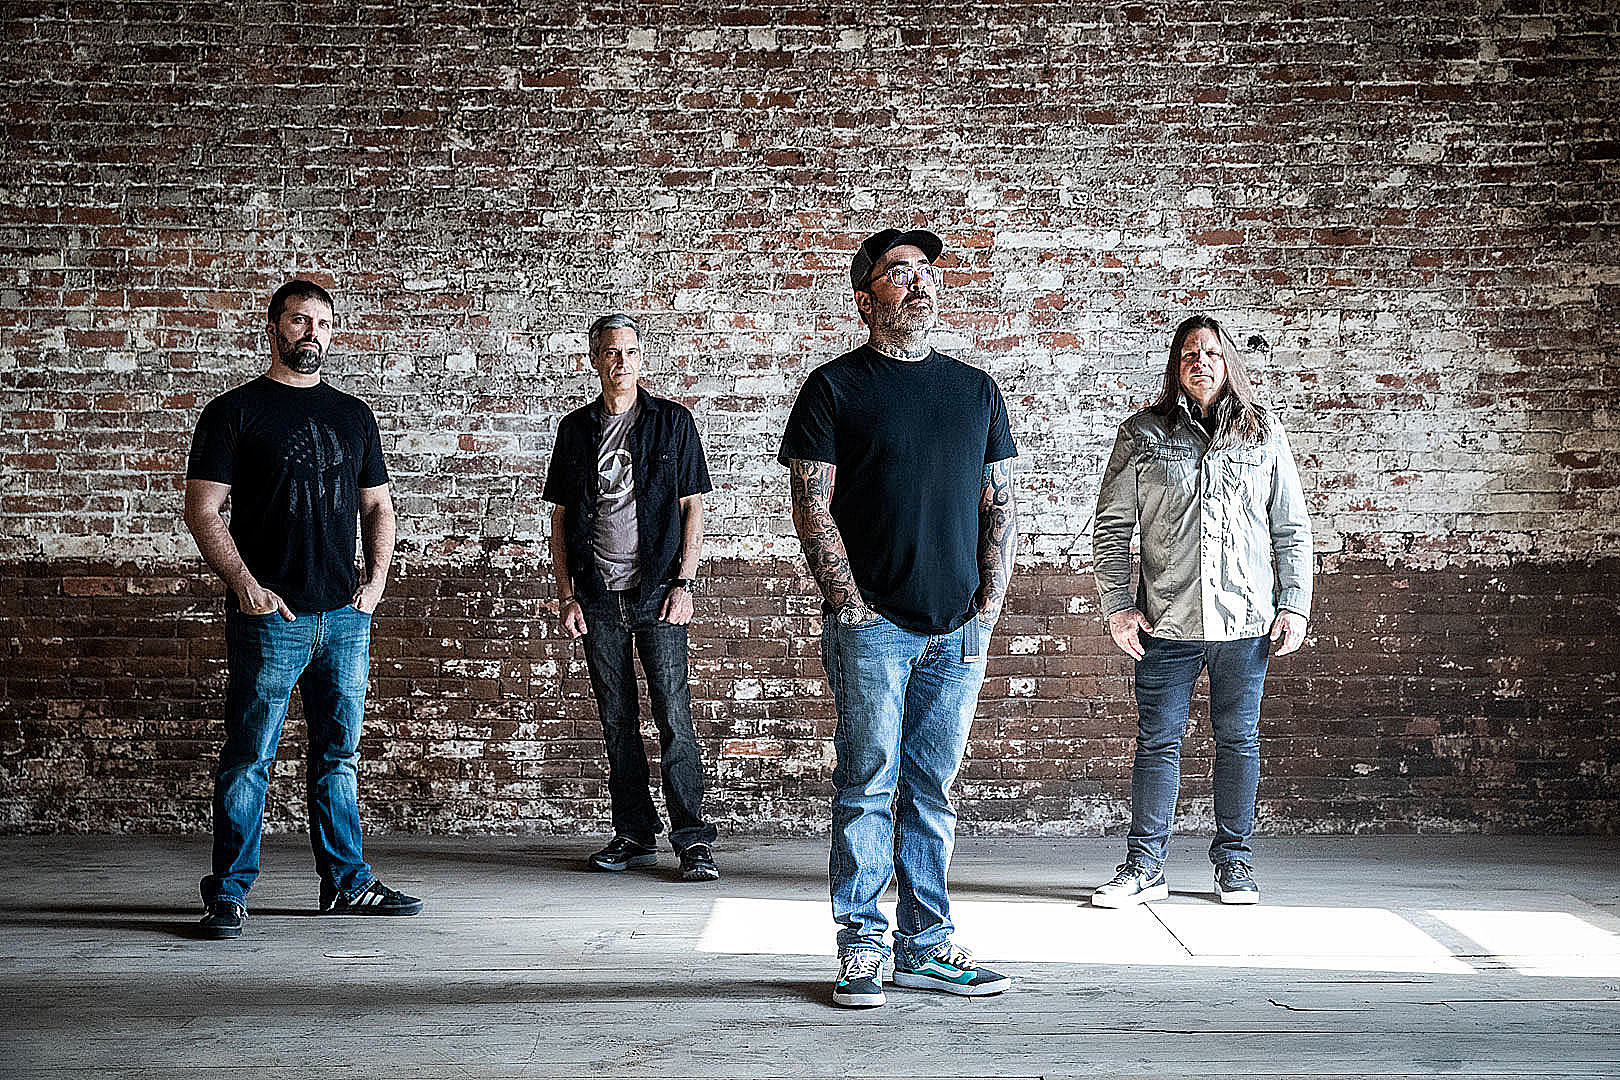 Www Xxx Video Ben Tem - Staind Release Video for First Song in 12 Years, 'Lowest in Me'